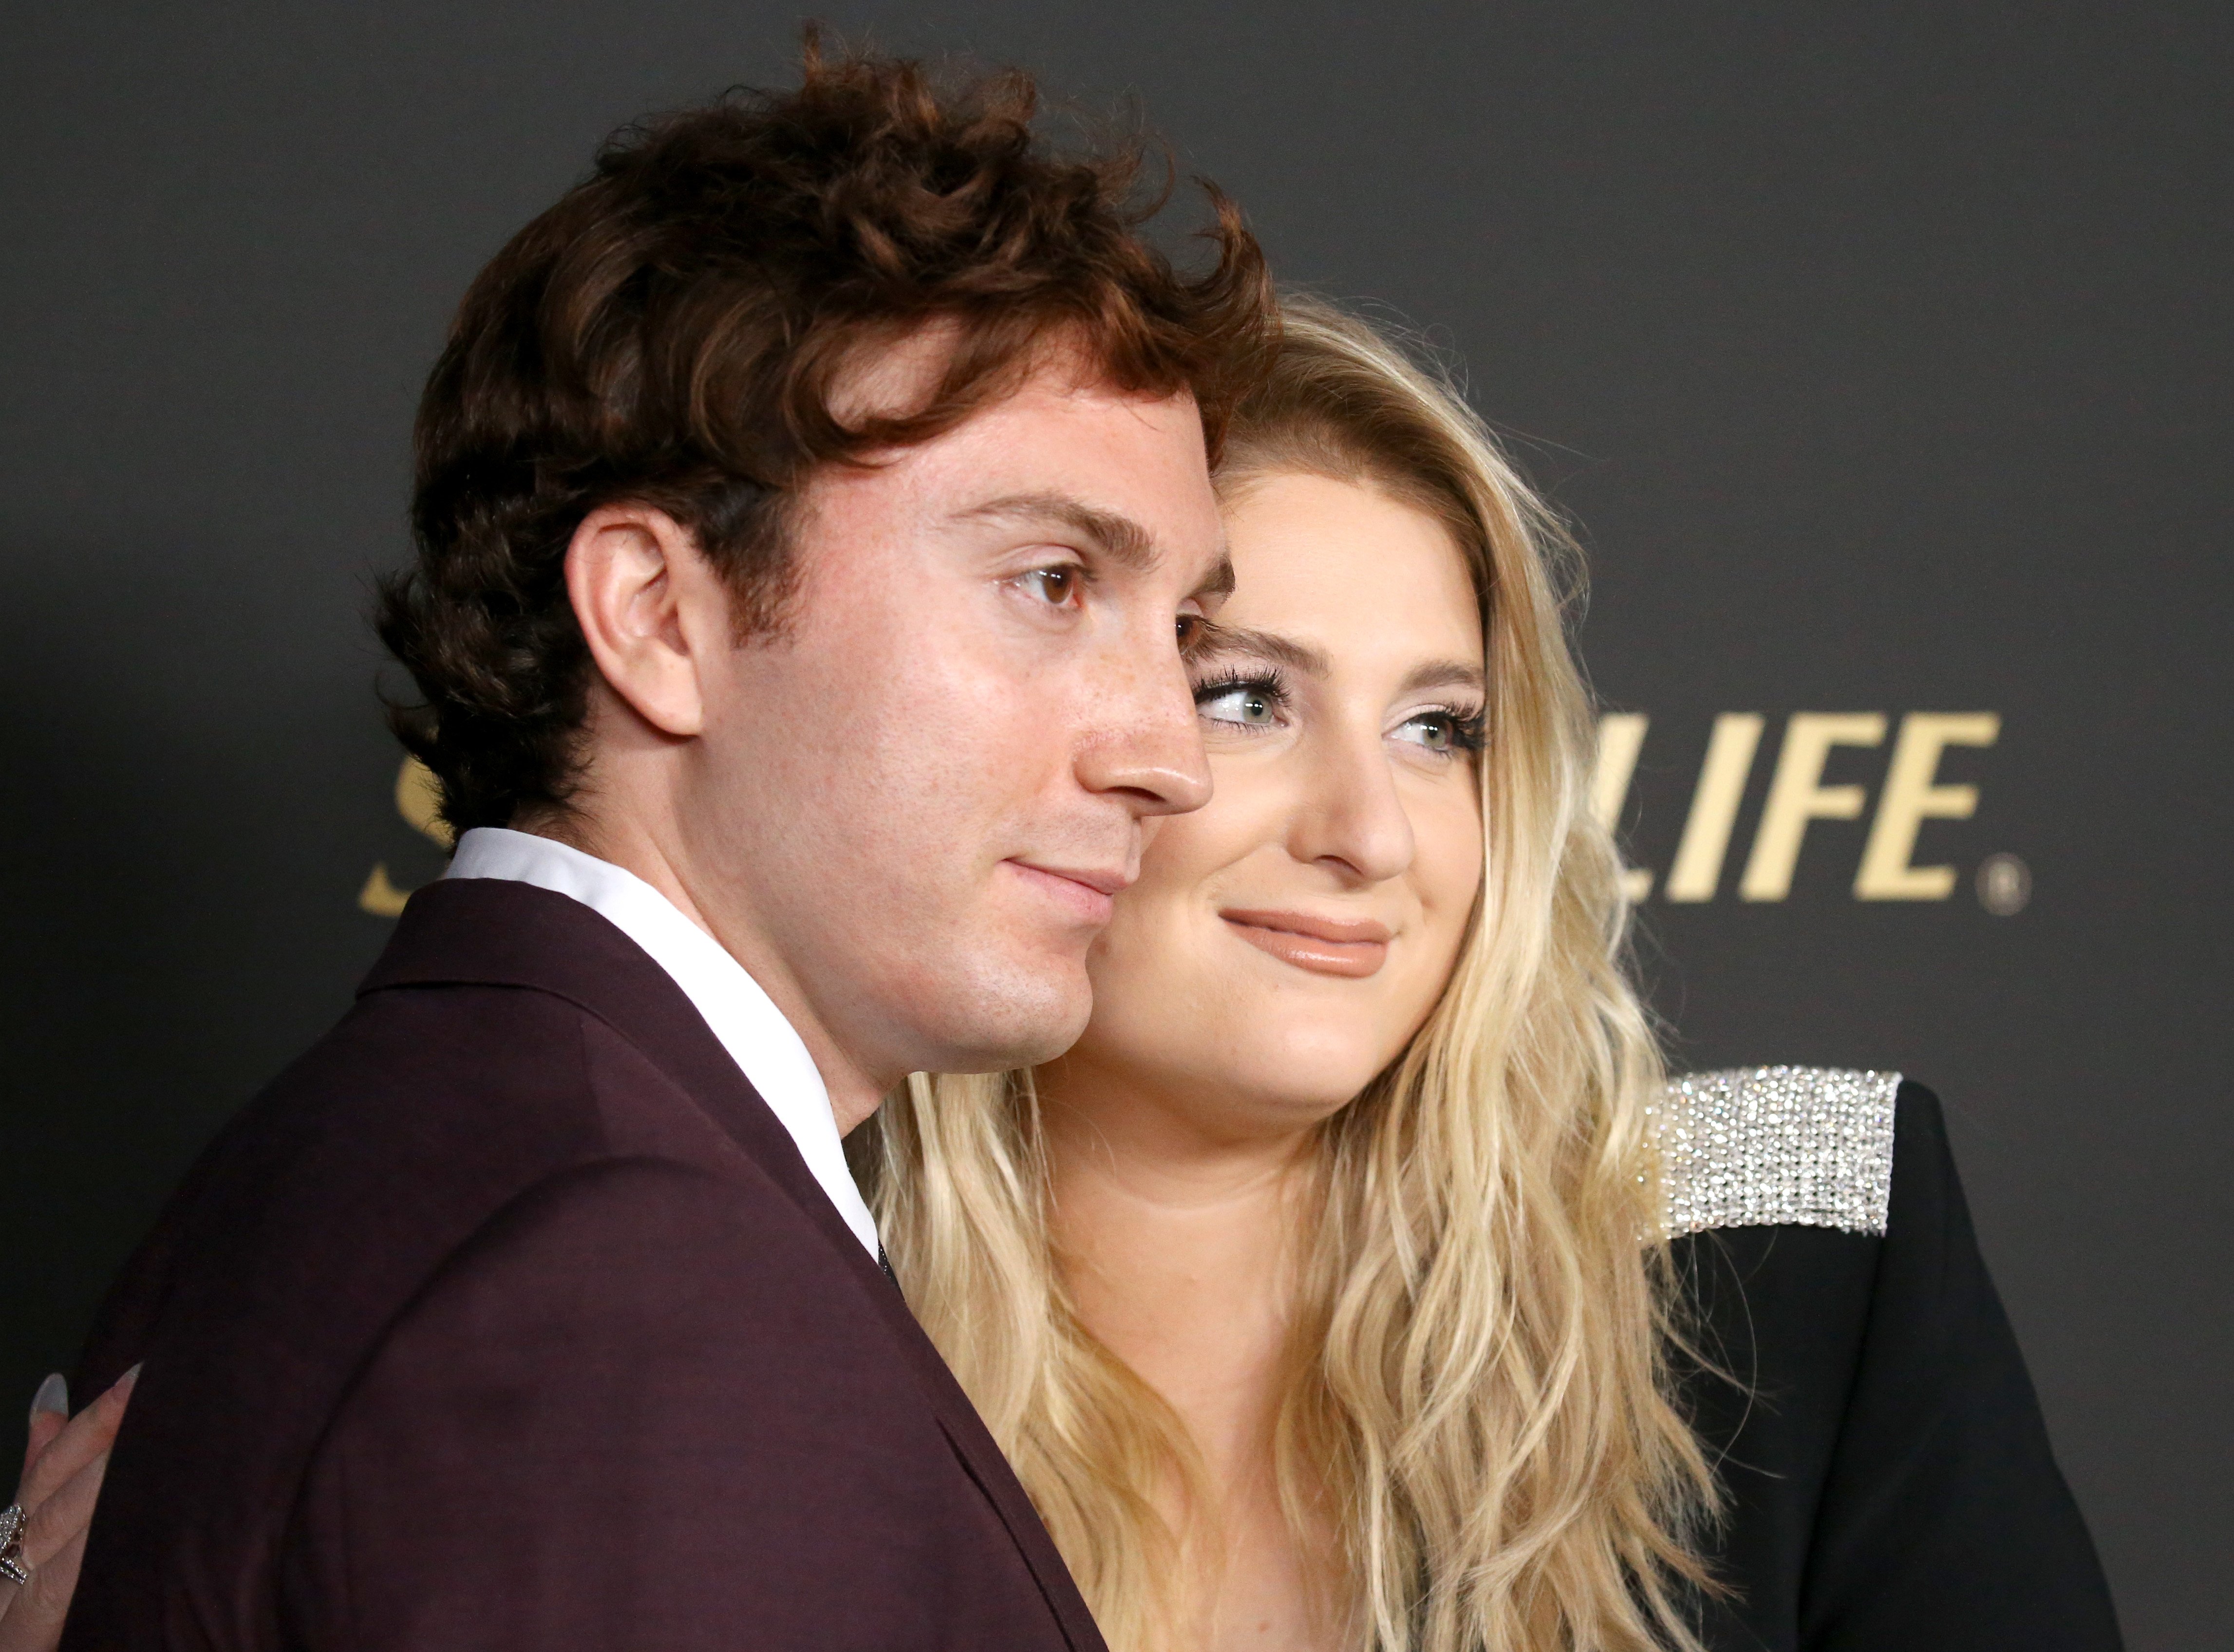 Daryl Sabara and Meghan Trainor attend the City Of Hope's Spirit of Life 2019 Gala on October 10, 2019 in Santa Monica, California. | Source: Getty Images